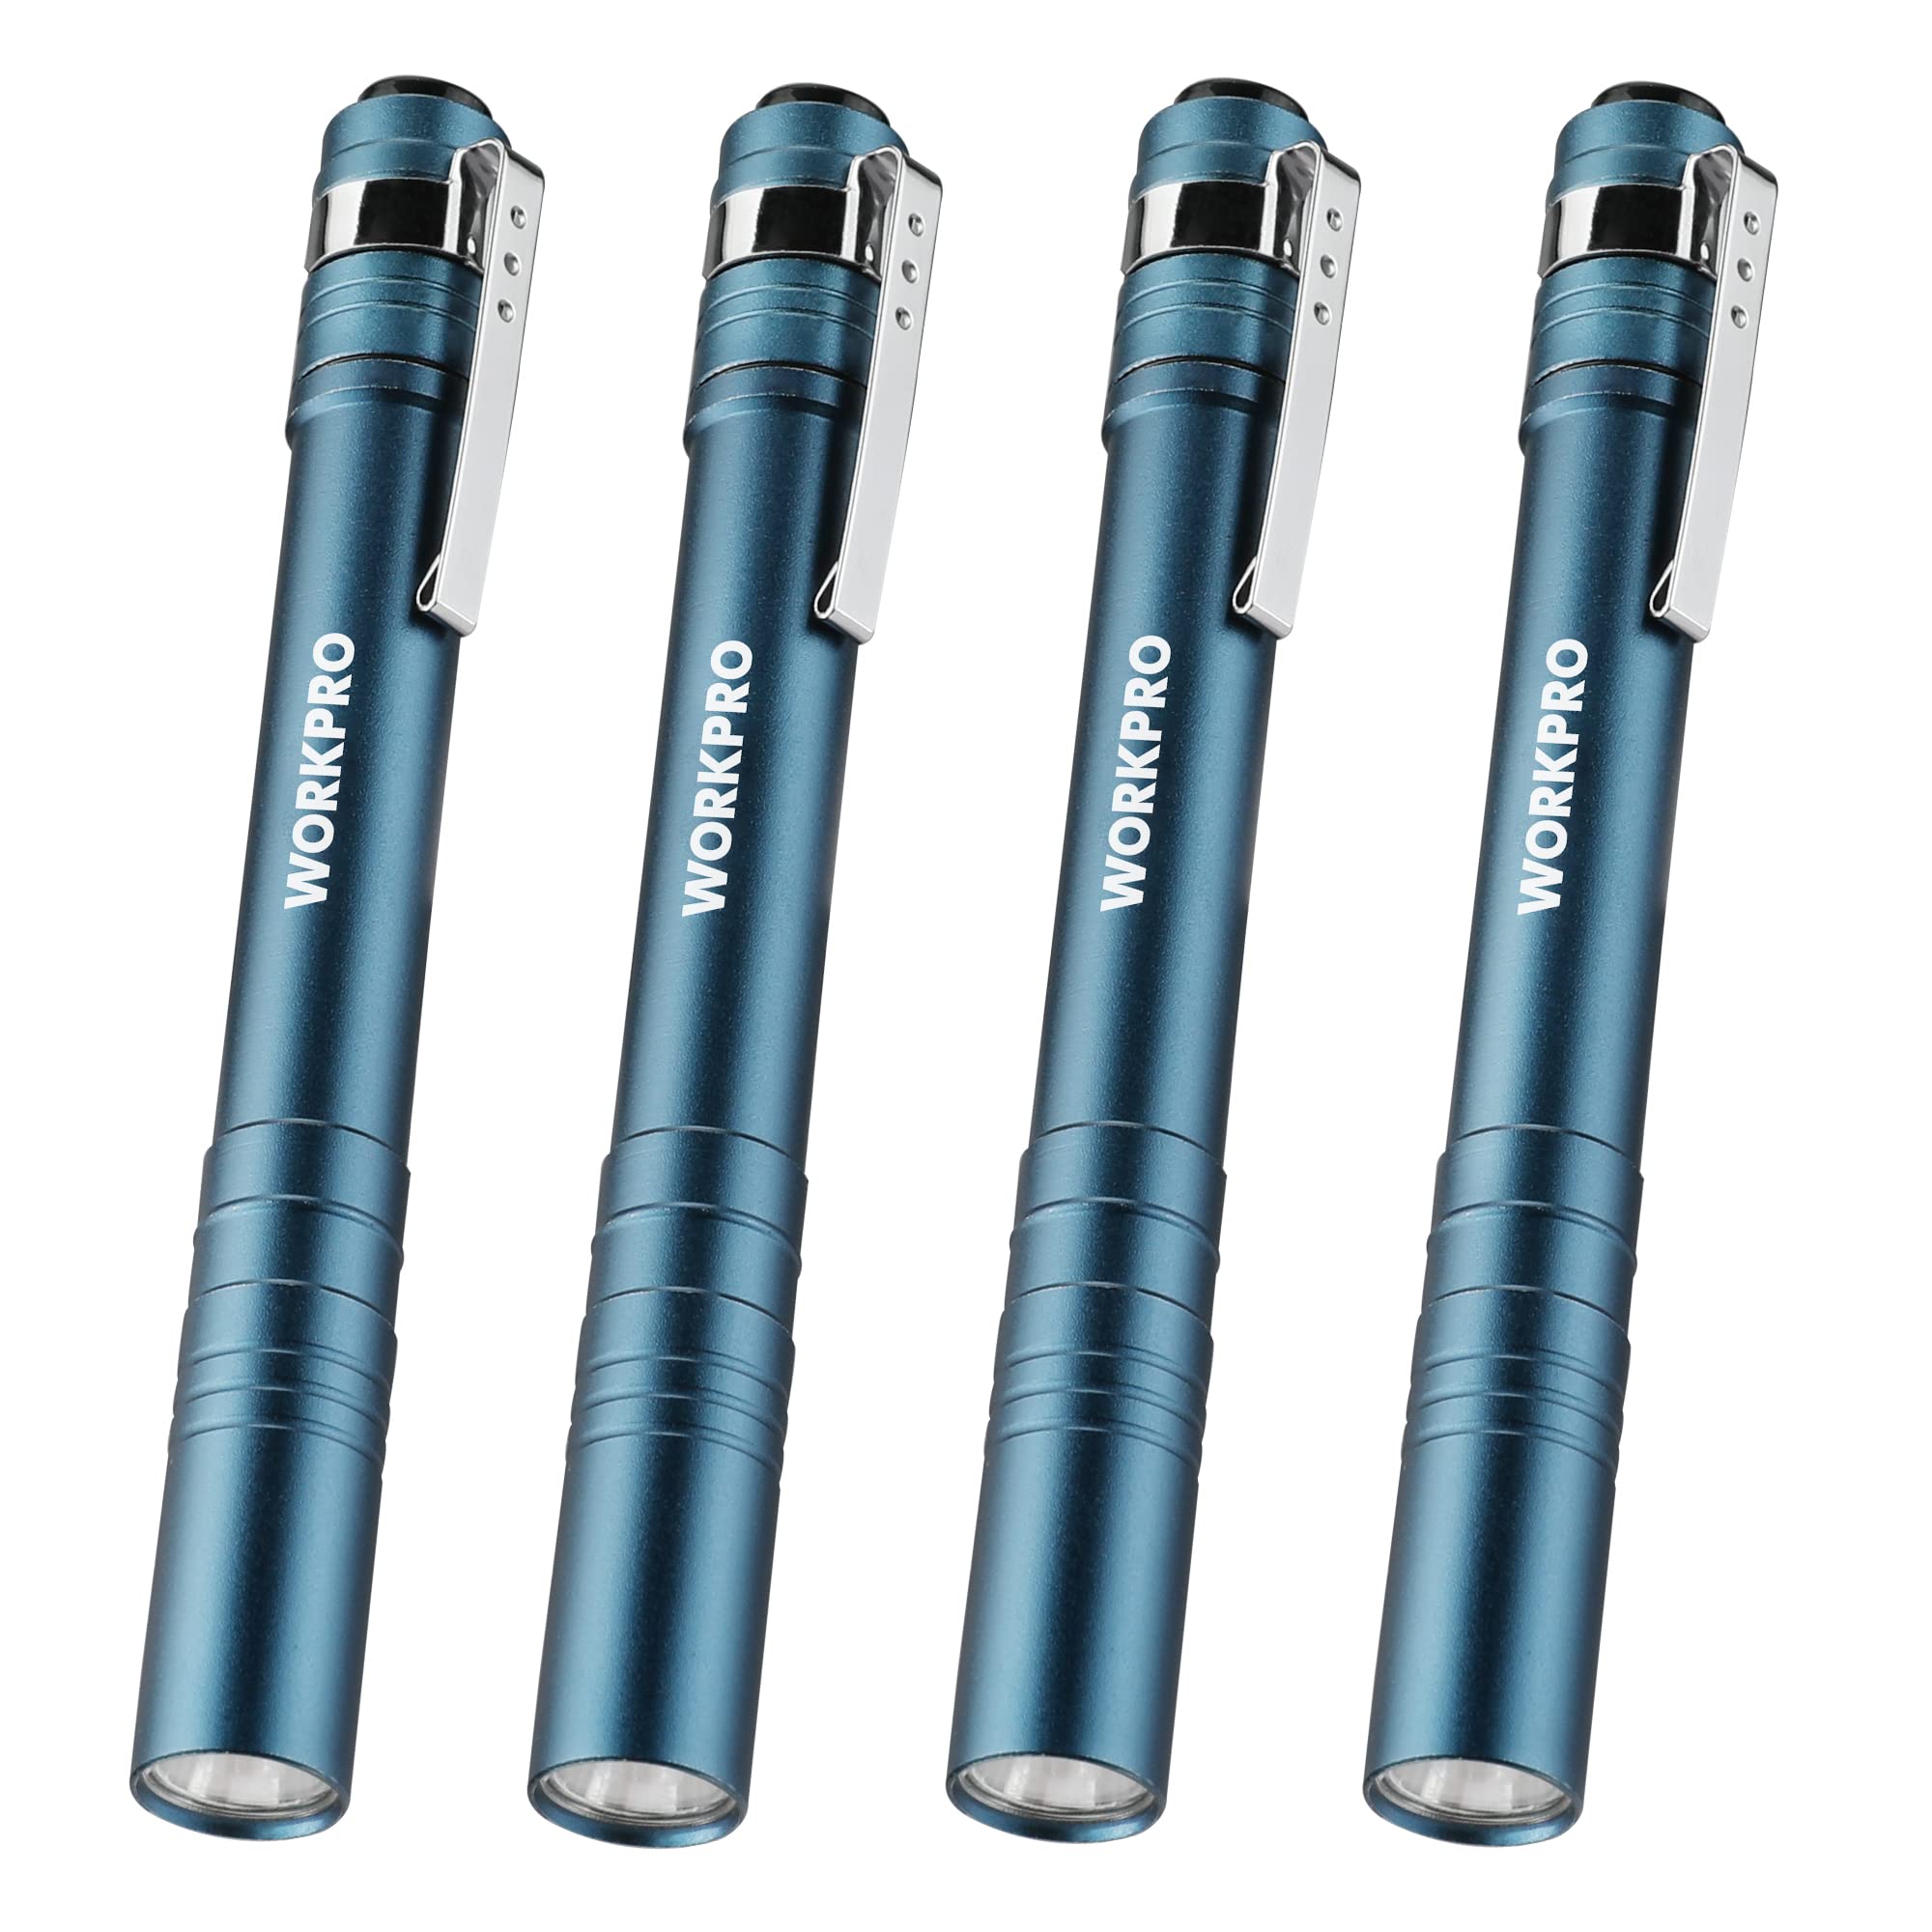 WORKPRO LED Pen Light Set, Battery-Powered Aluminum Handheld Flashlights, Pocket Torch Penlight with High Lumens for Camping, Outdoor, Emergency, Everyday, 8AAA Batteries Included, Blue (4-Pack)